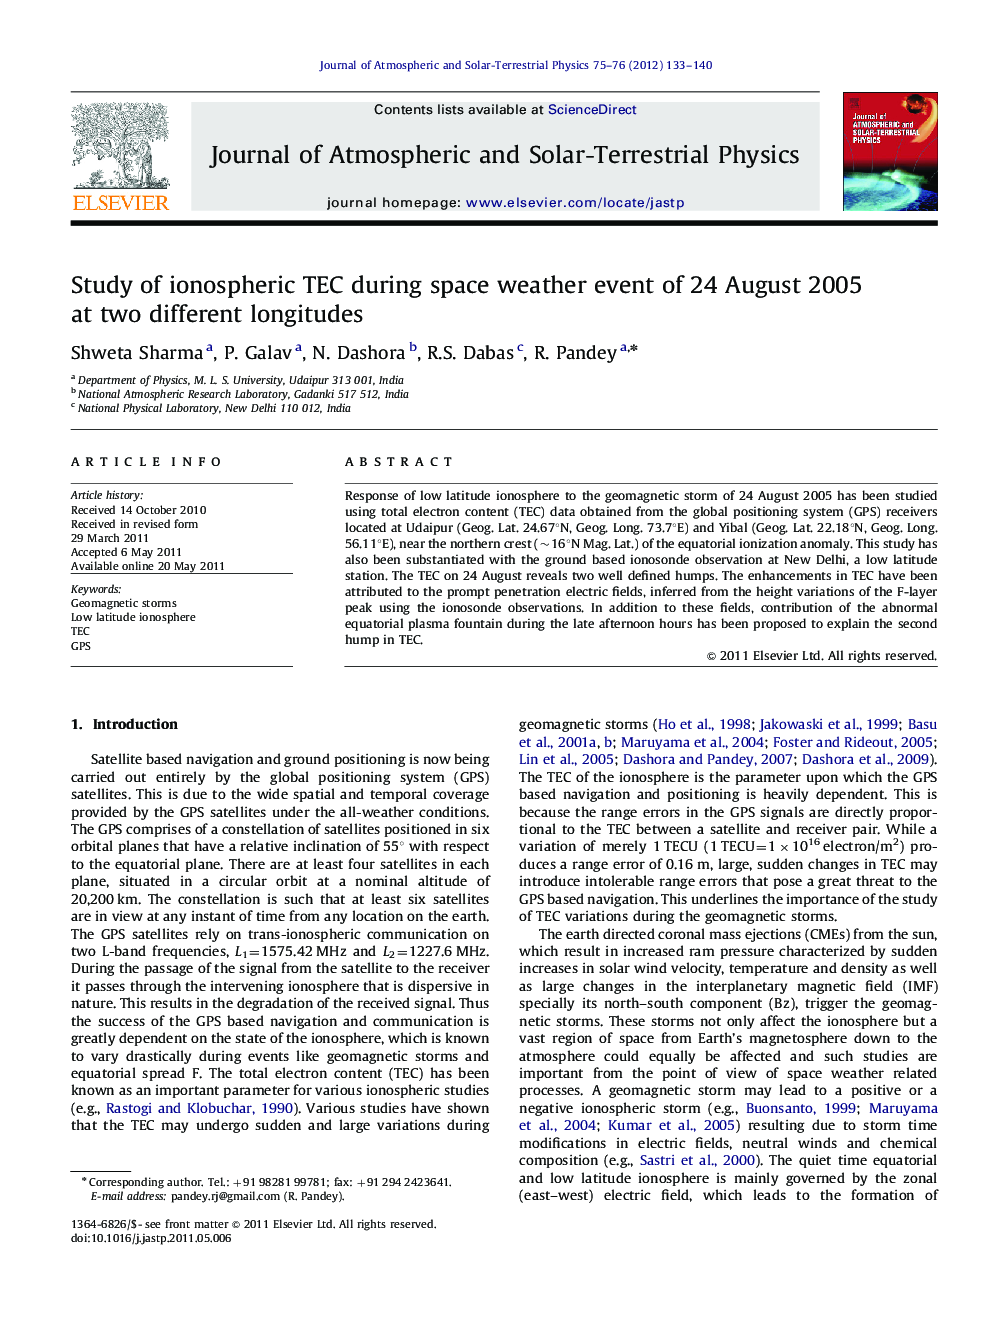 Study of ionospheric TEC during space weather event of 24 August 2005 at two different longitudes